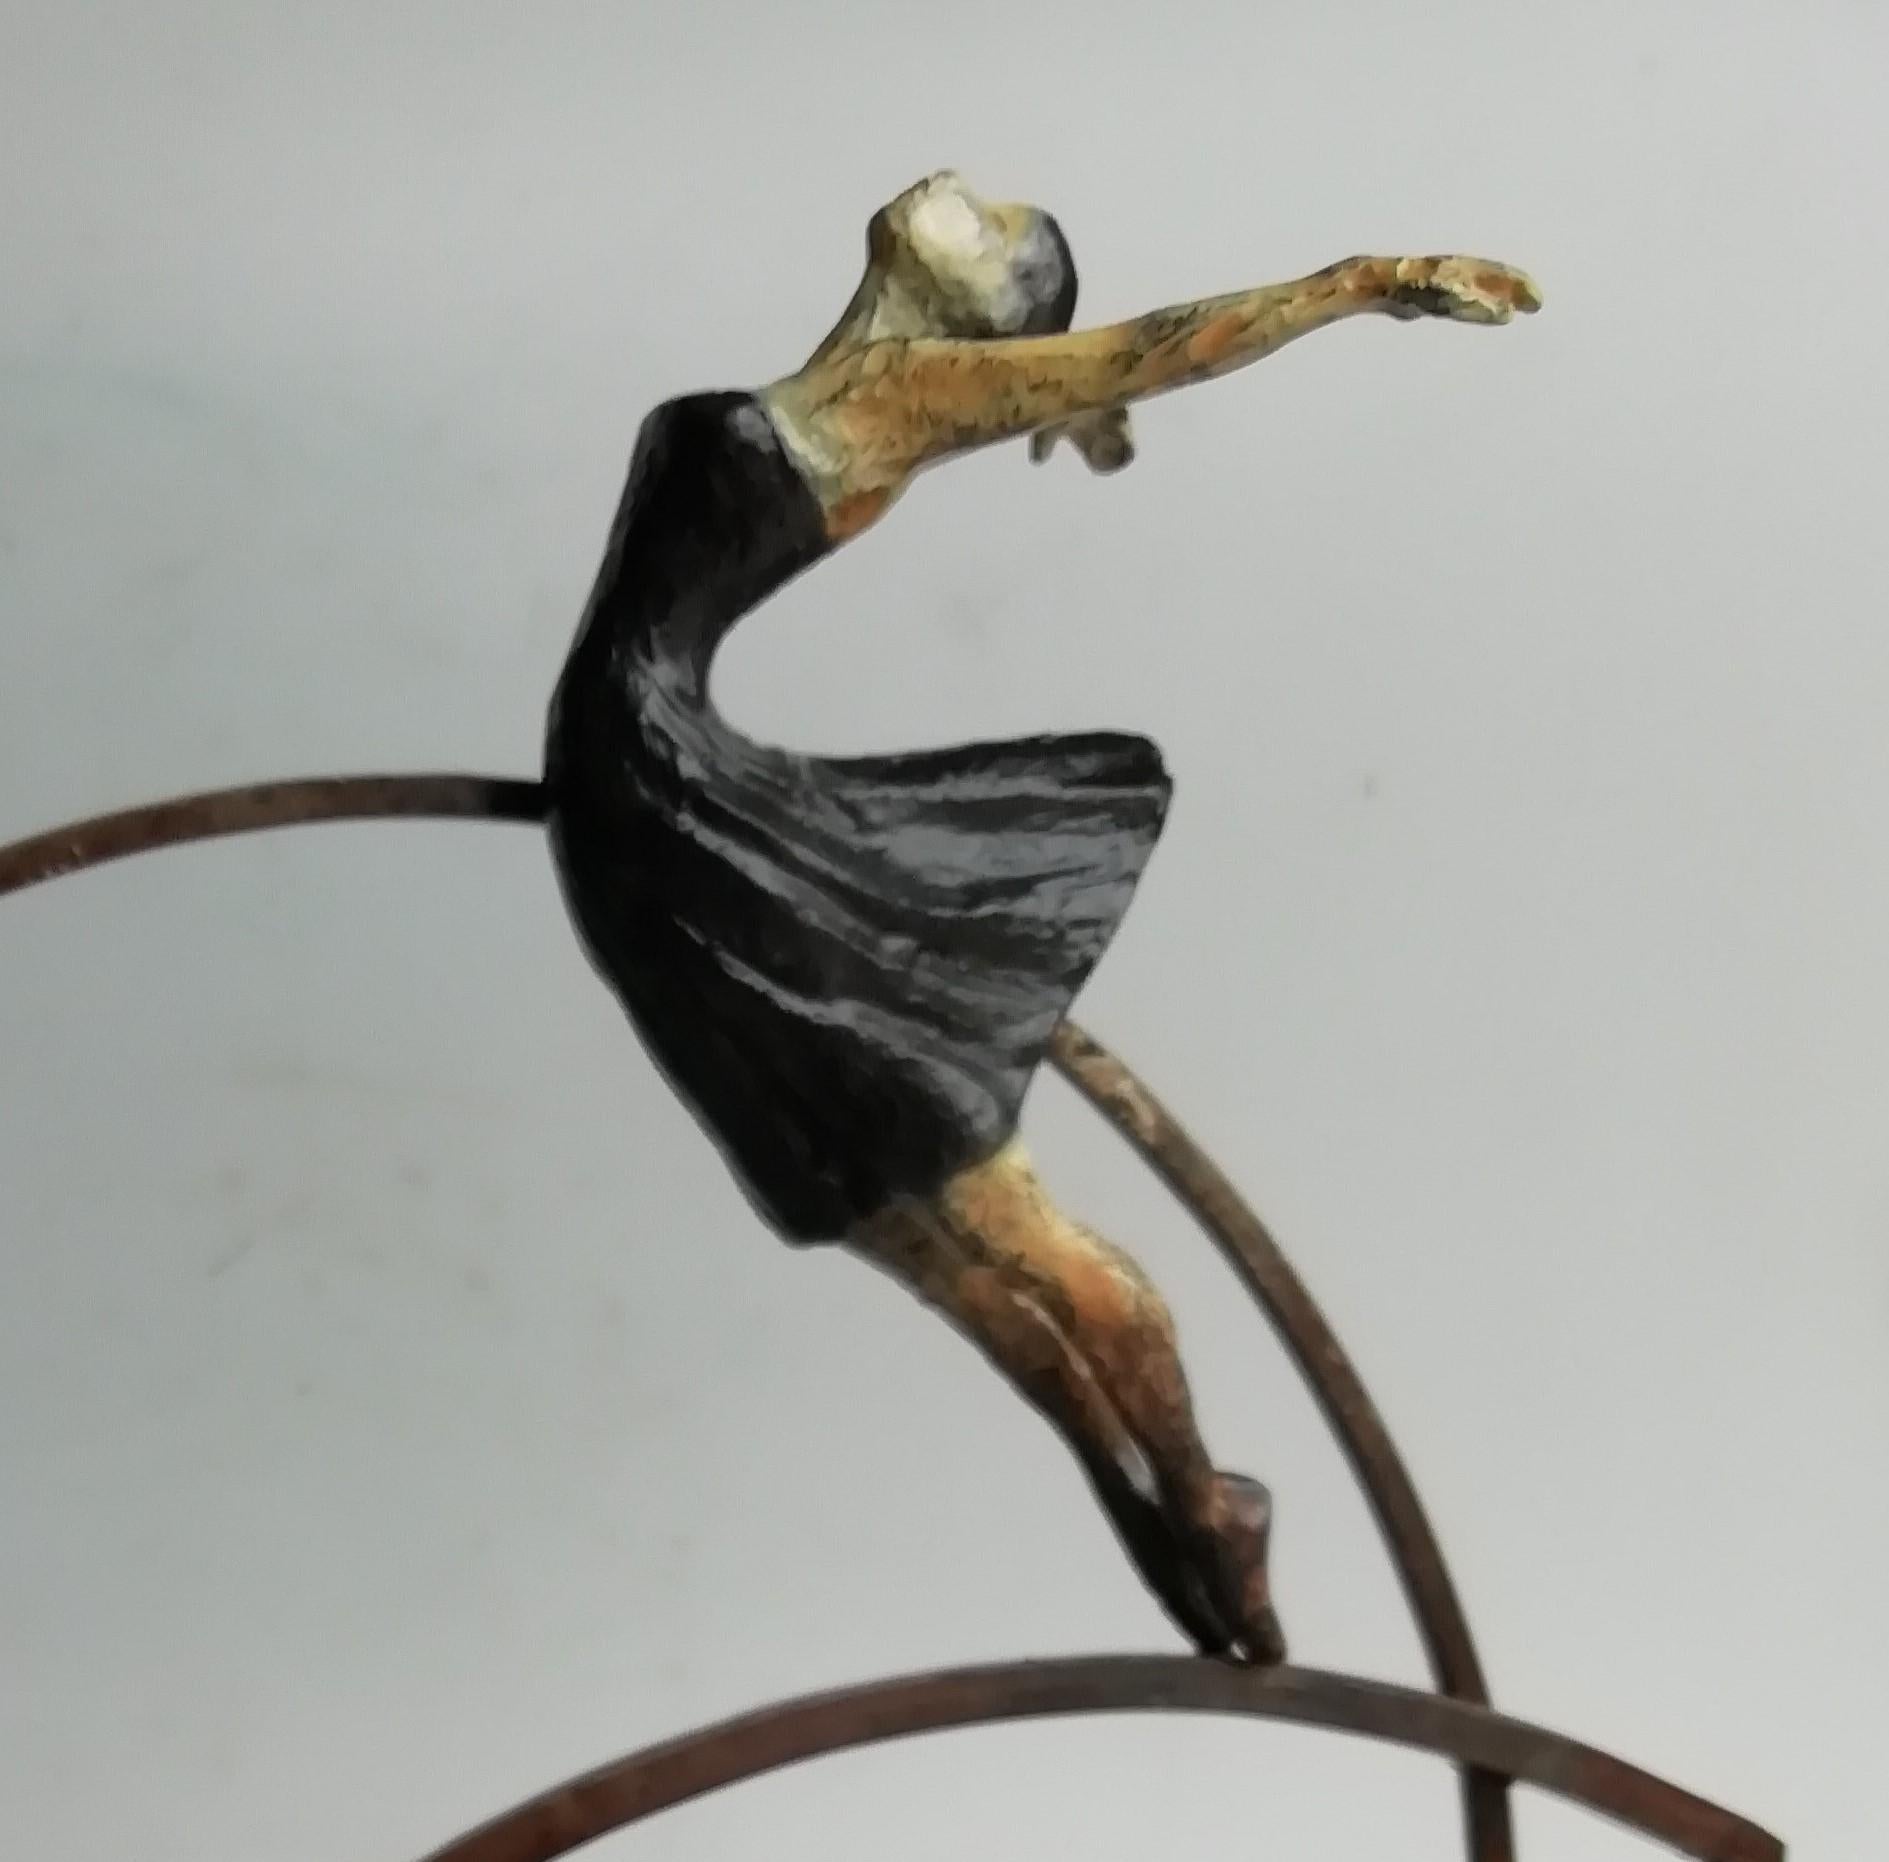 Victory is a bronze sculpture with black and beige patinas, it is connected to a steel base. The edition size is 50. Victory is a depiction of freedom and sense of free will, especially for a woman. This sculpture stands on shelf as well as be hung